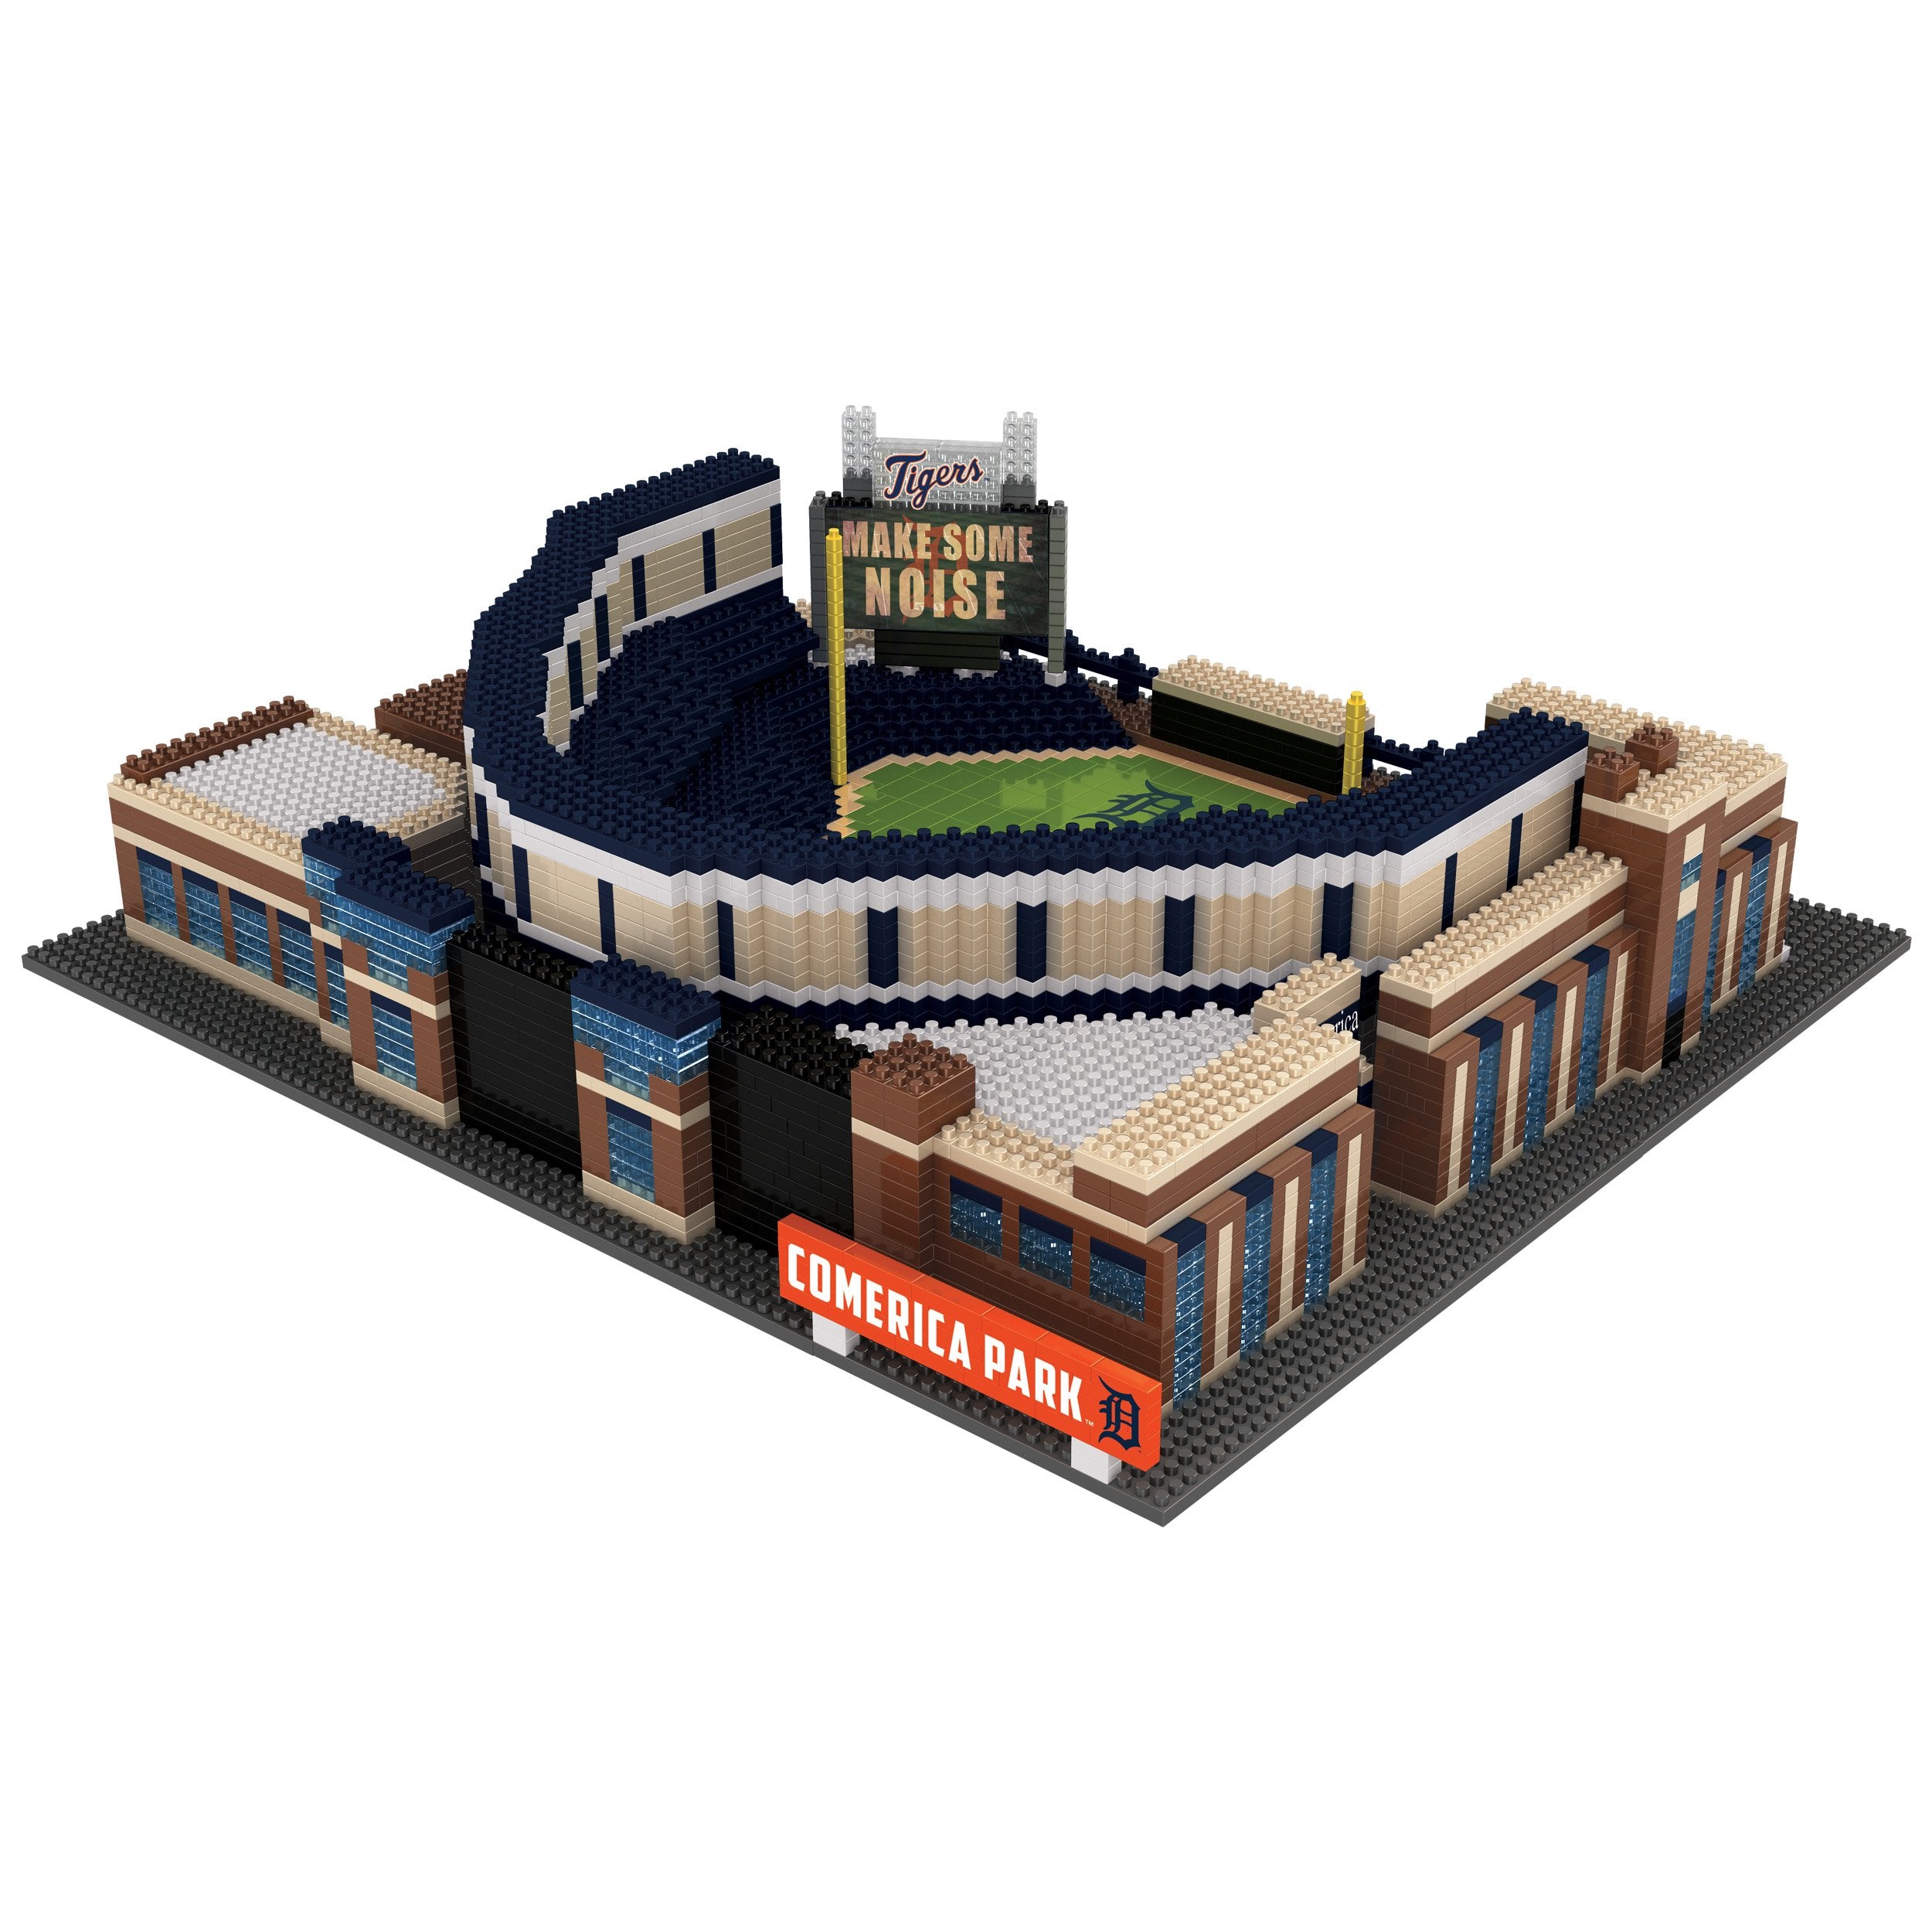 A guide to new Tigers apparel and merchandise at Comerica Park